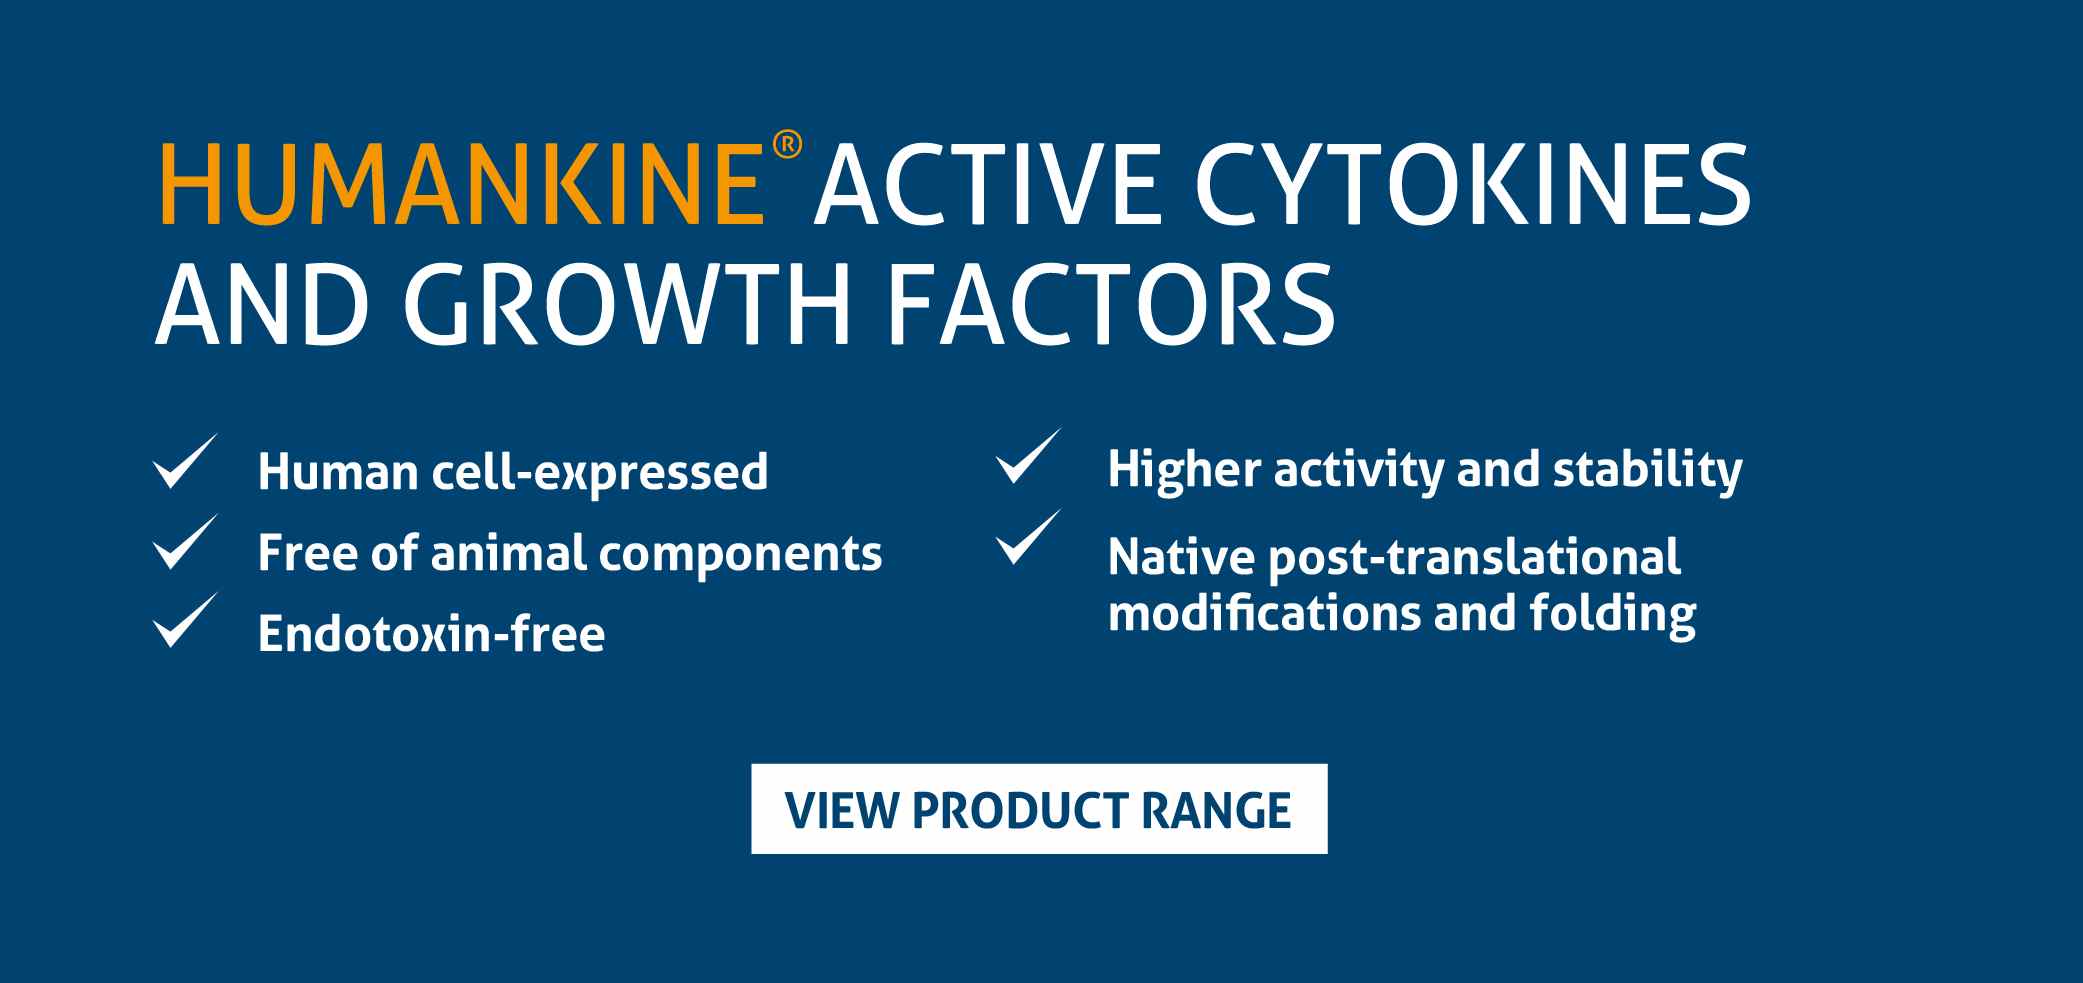 HumanKine Active Cytokines and Growth Factors